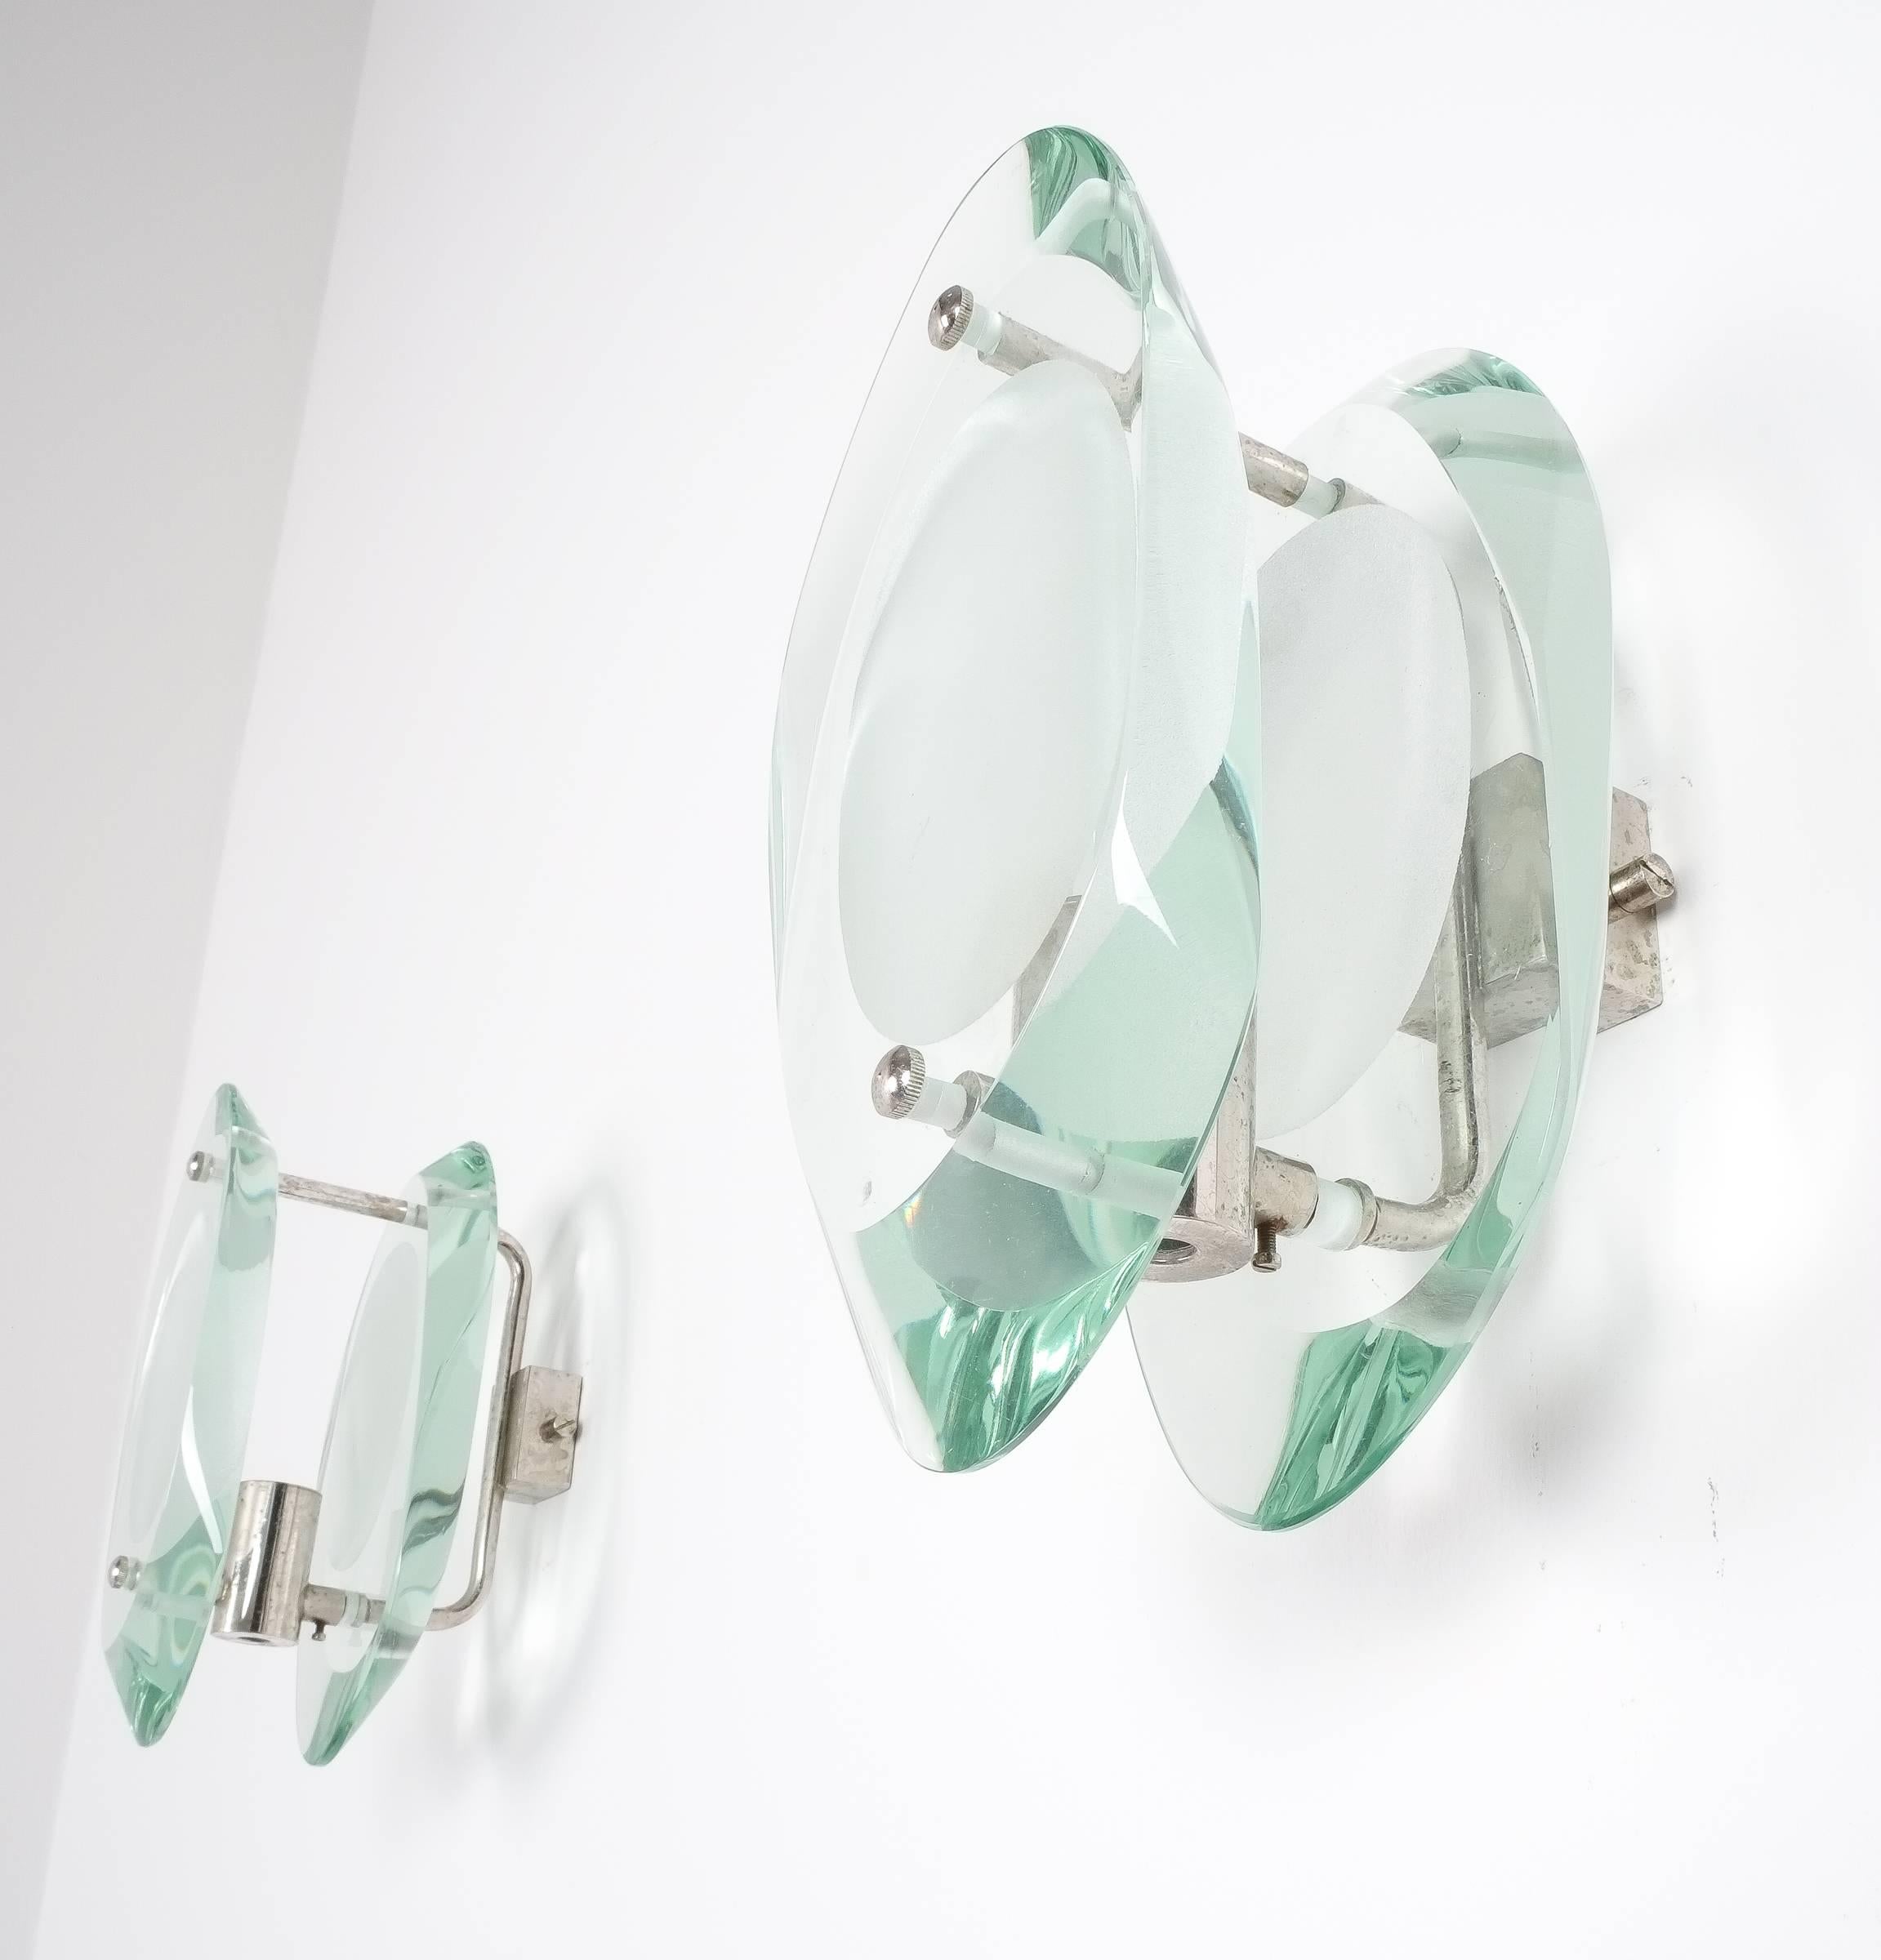 Max Ingrand for Fontana Arte glass sconces wall lamps set of four, Italy, 1960. Double lens cut panels of thick profiled polished glass with etched glass centers. Nickel-plated metal mounts. Newly rewired and refurbished, excellent condition. We